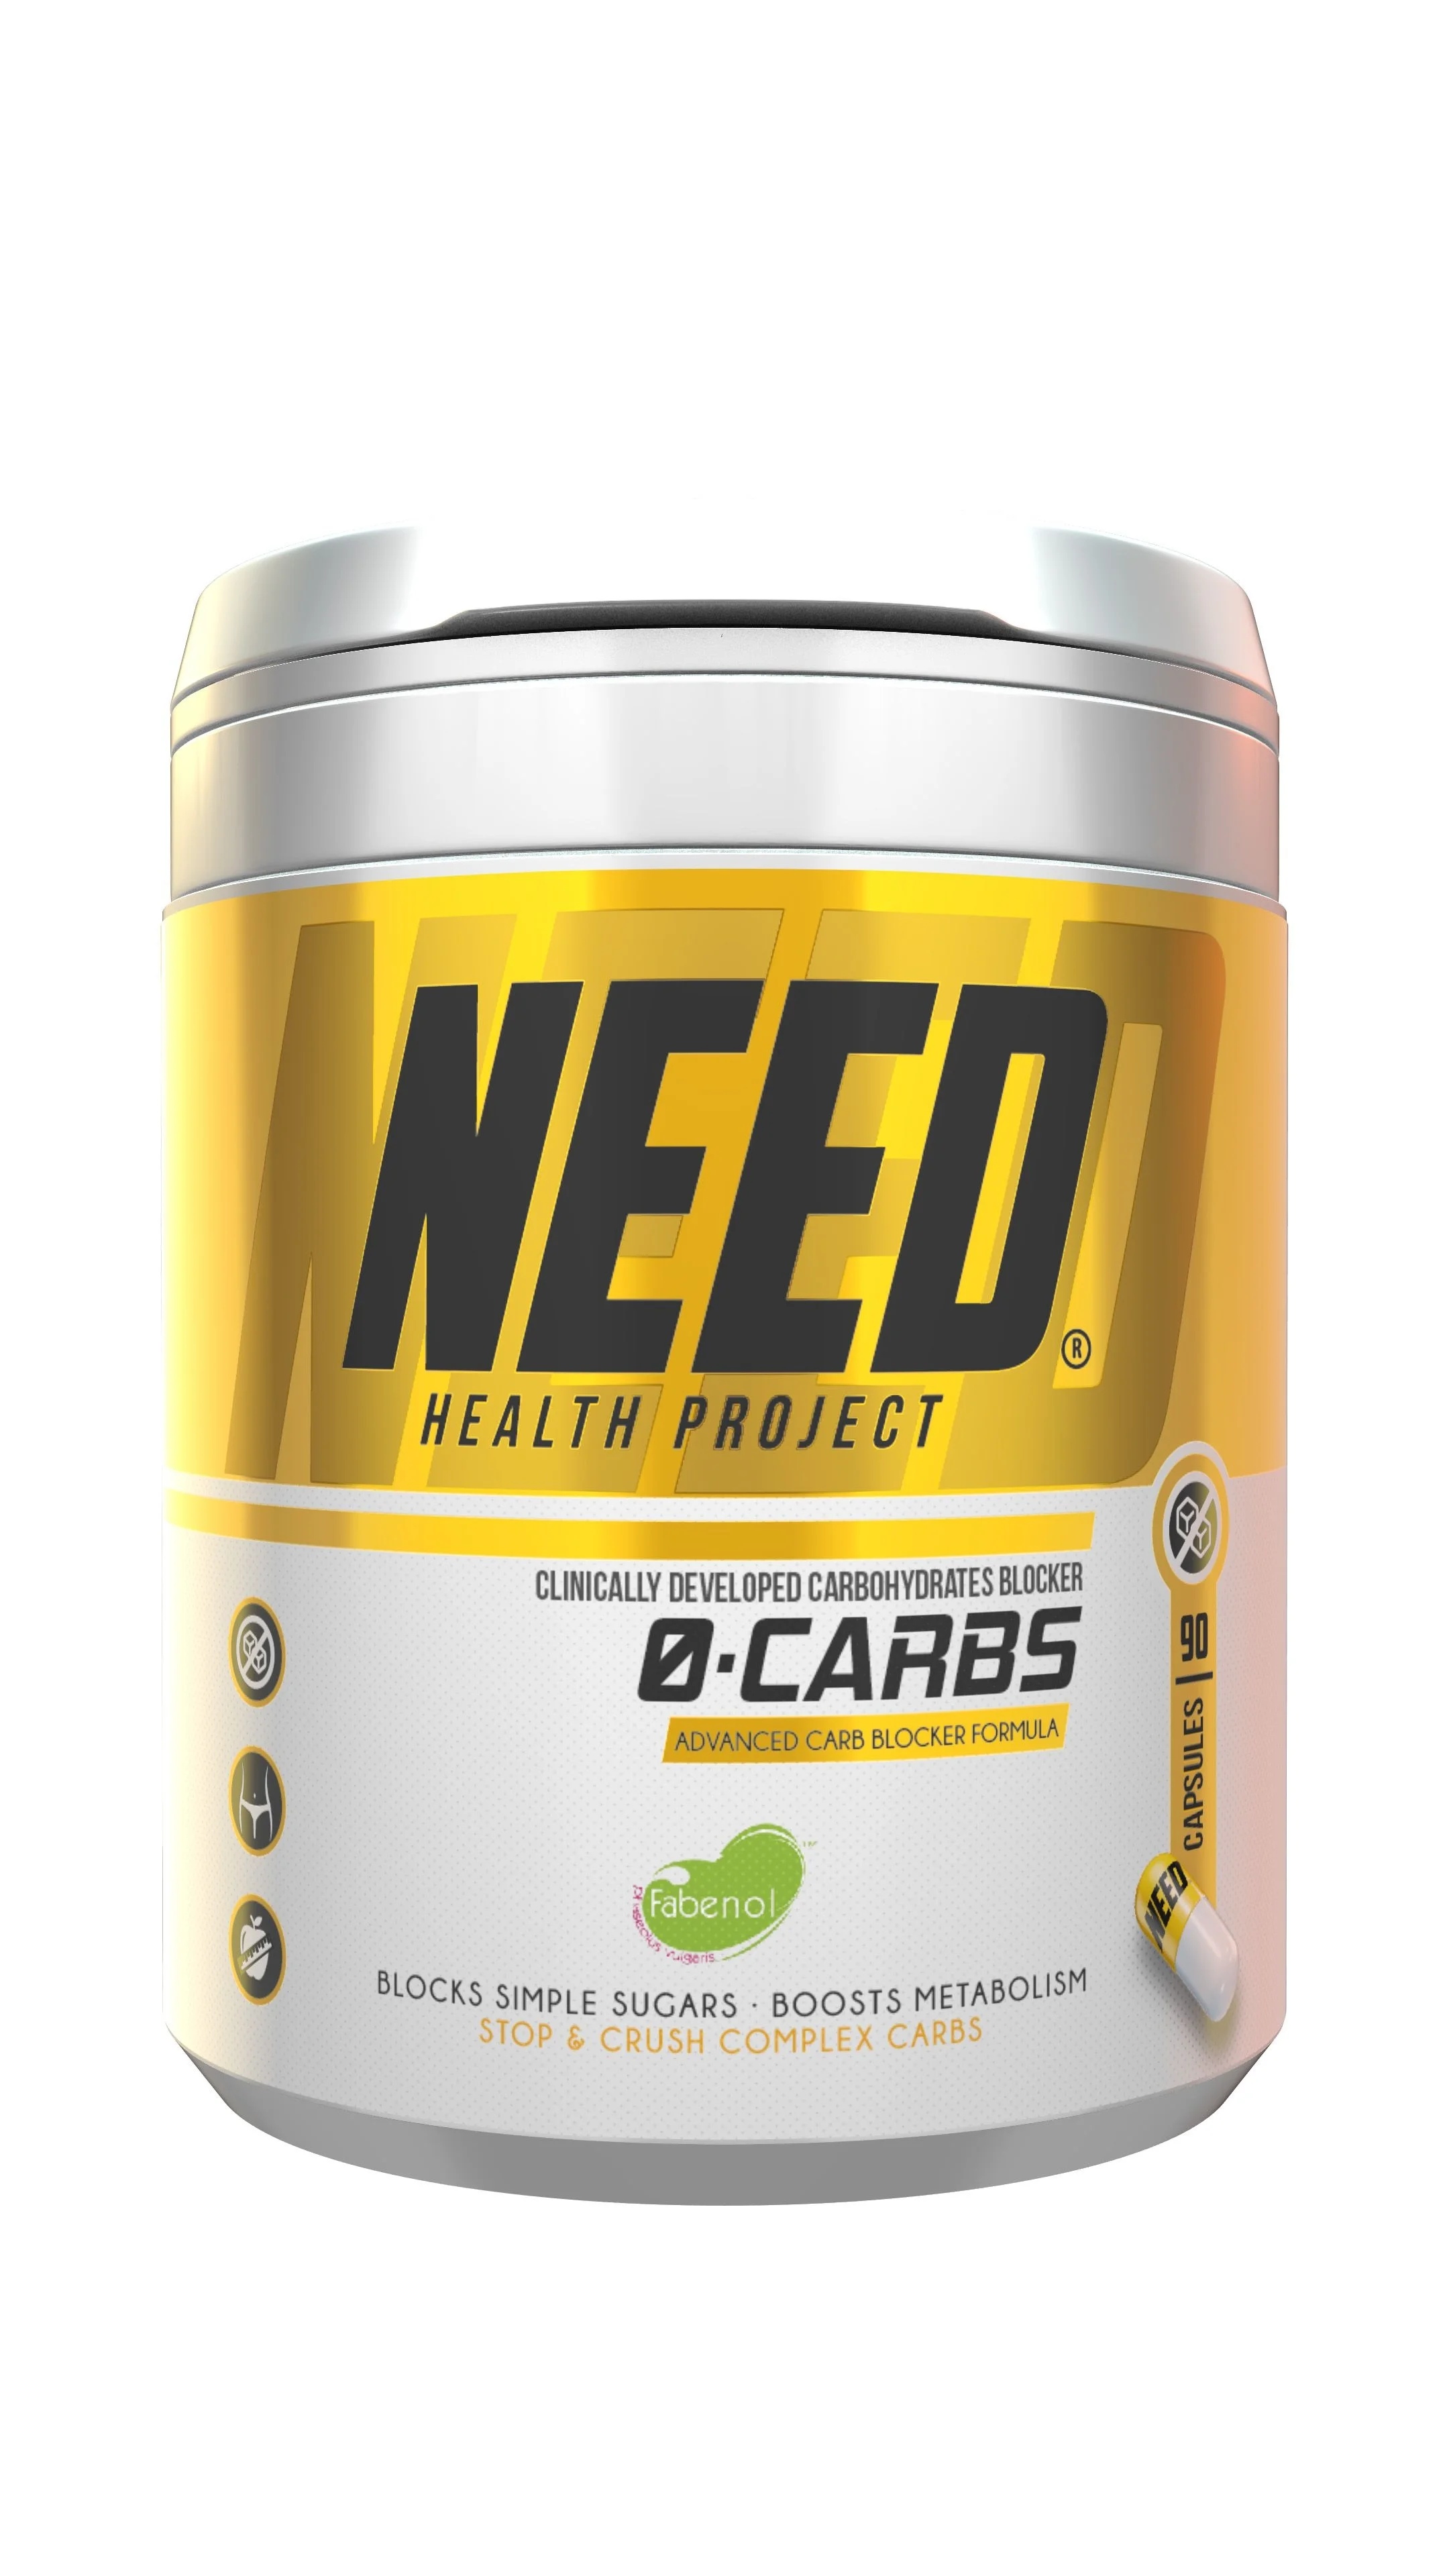 NEED Health Project NEED 0-CARBS 90 capsules